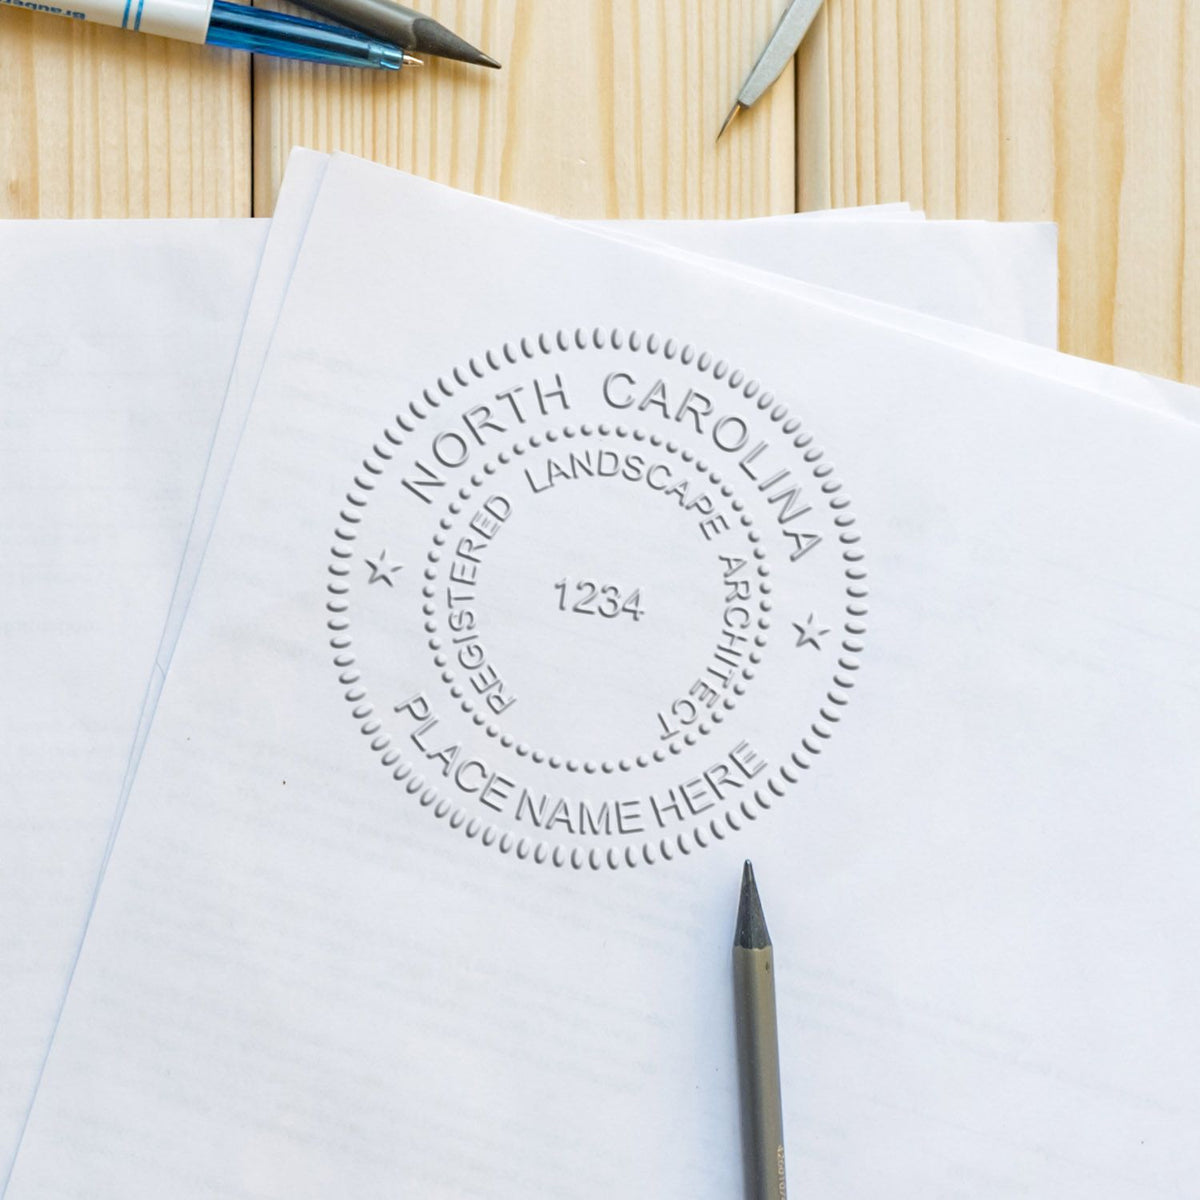 Another Example of a stamped impression of the Hybrid North Carolina Landscape Architect Seal on a office form